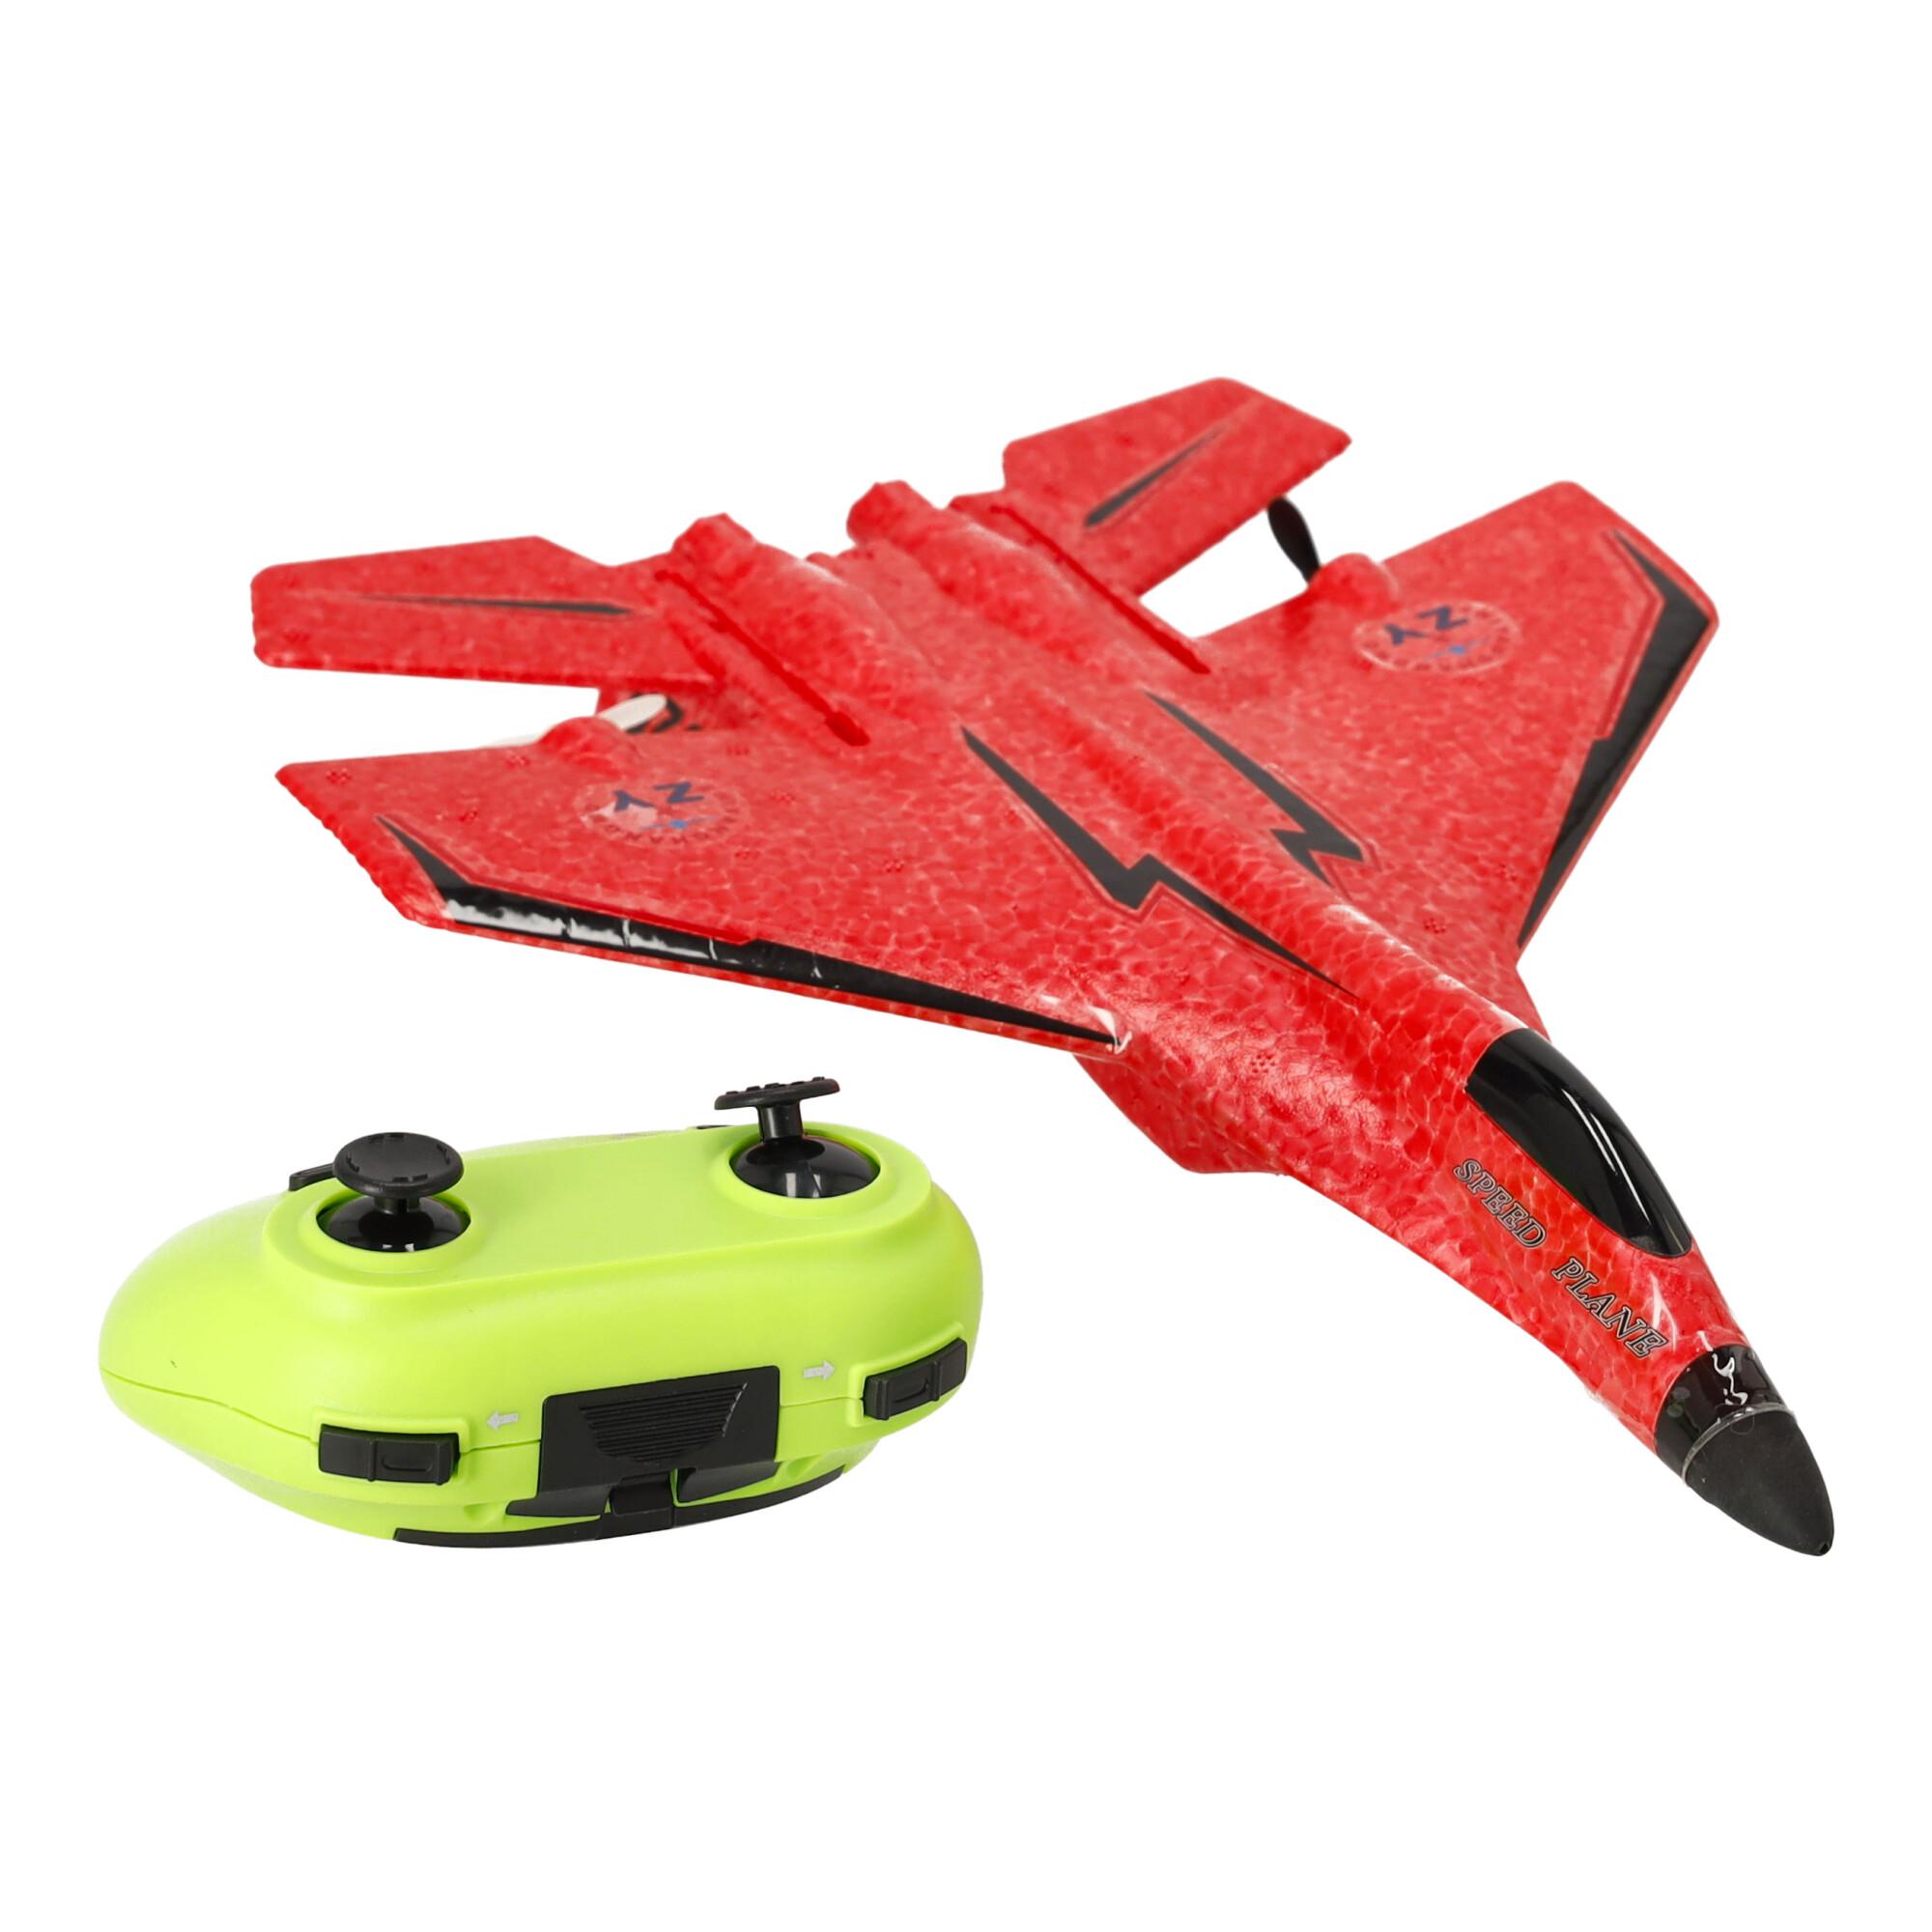 The Ultra-Light Remote-Controlled Aircraft (Model ZY-320) operating on a 2.4GHZ frequency - Red